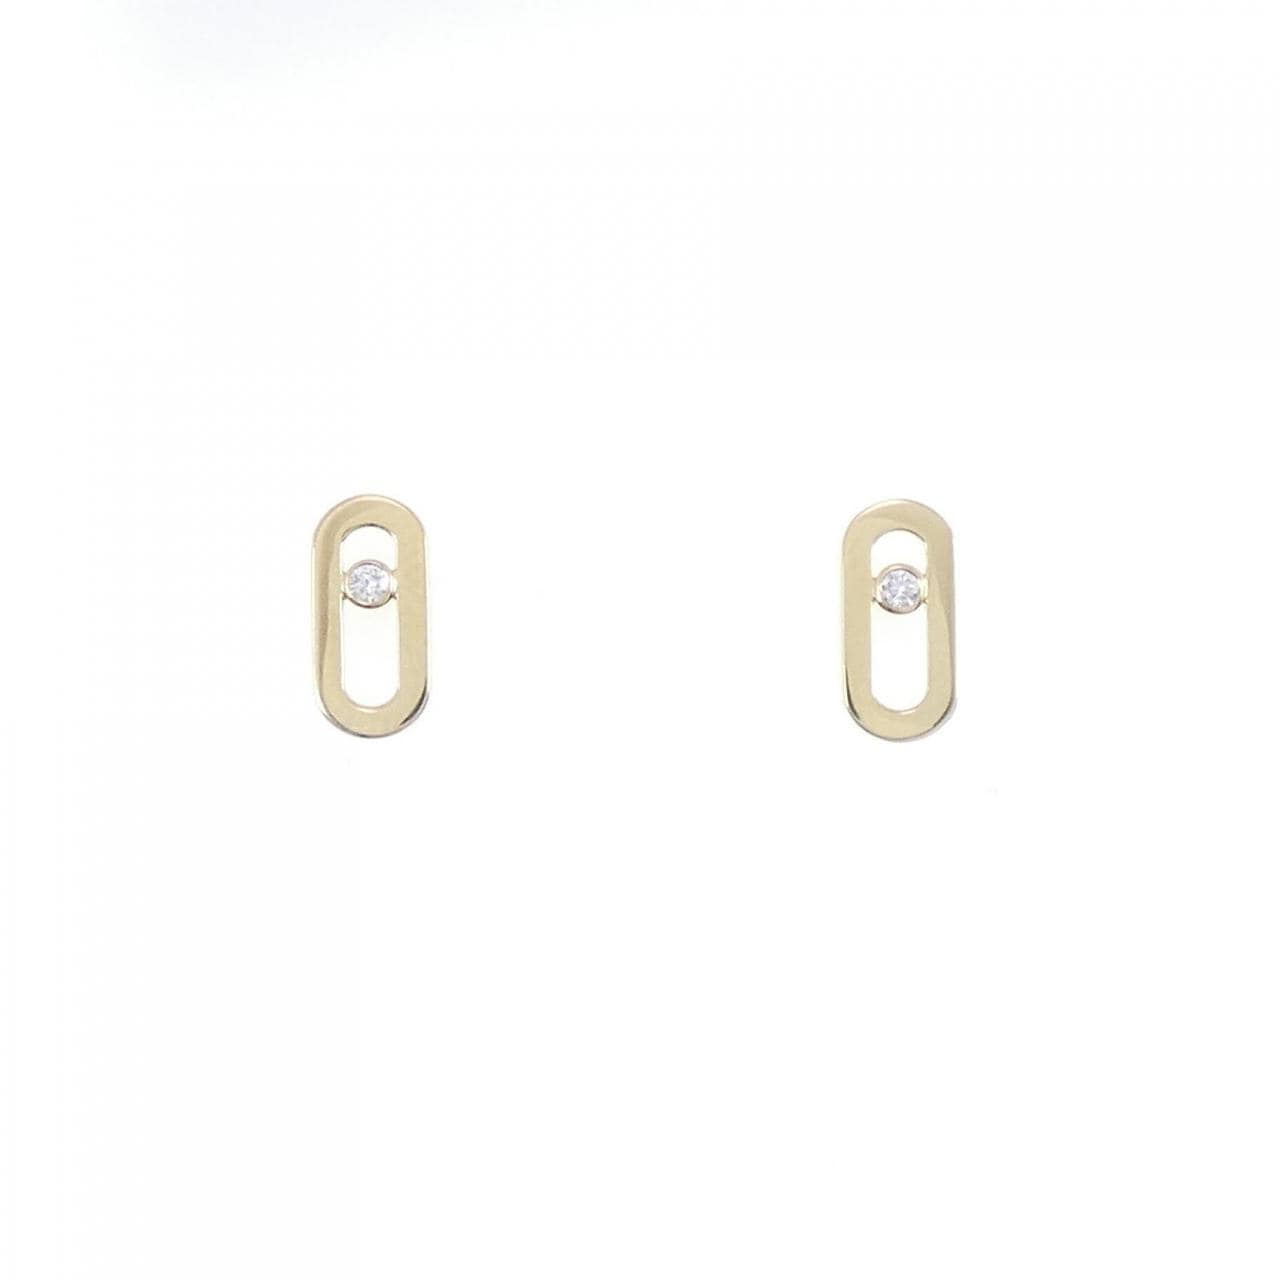 [BRAND NEW] Messika Move Uno earrings